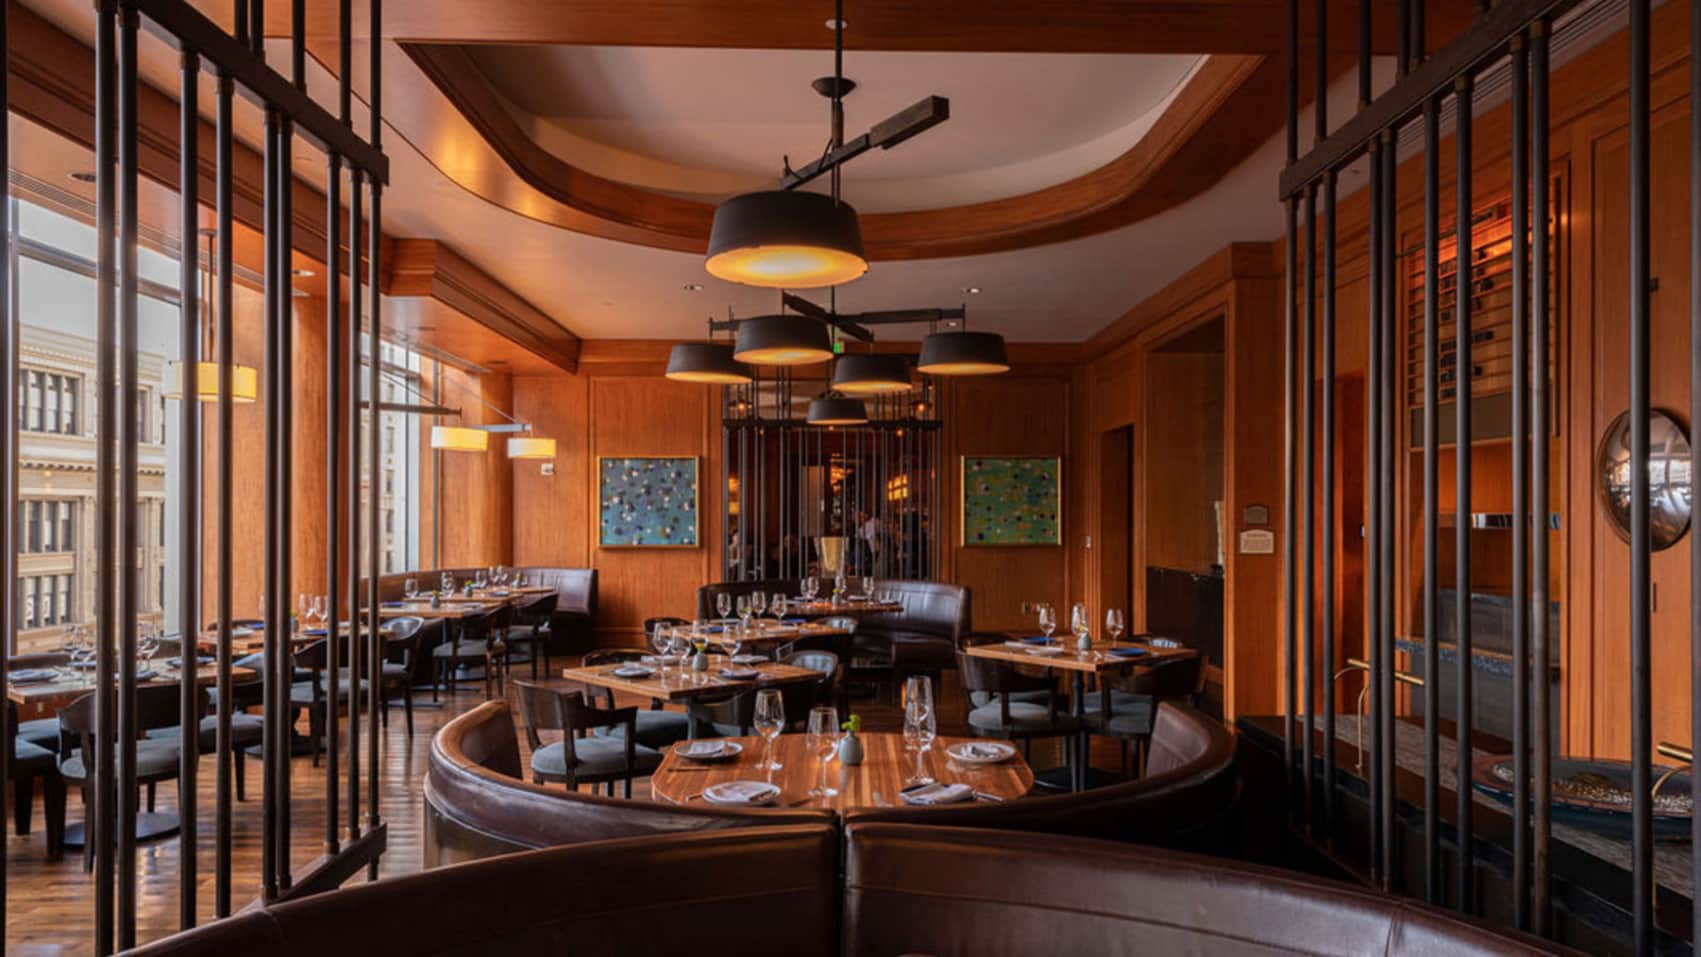 View of Upscale Dining Room with Tables Set and Waiting for Diners, Rich Wood-Paneled Walls, Contemporary Lighting, and Floor-to-Ceiling Views of Downtown